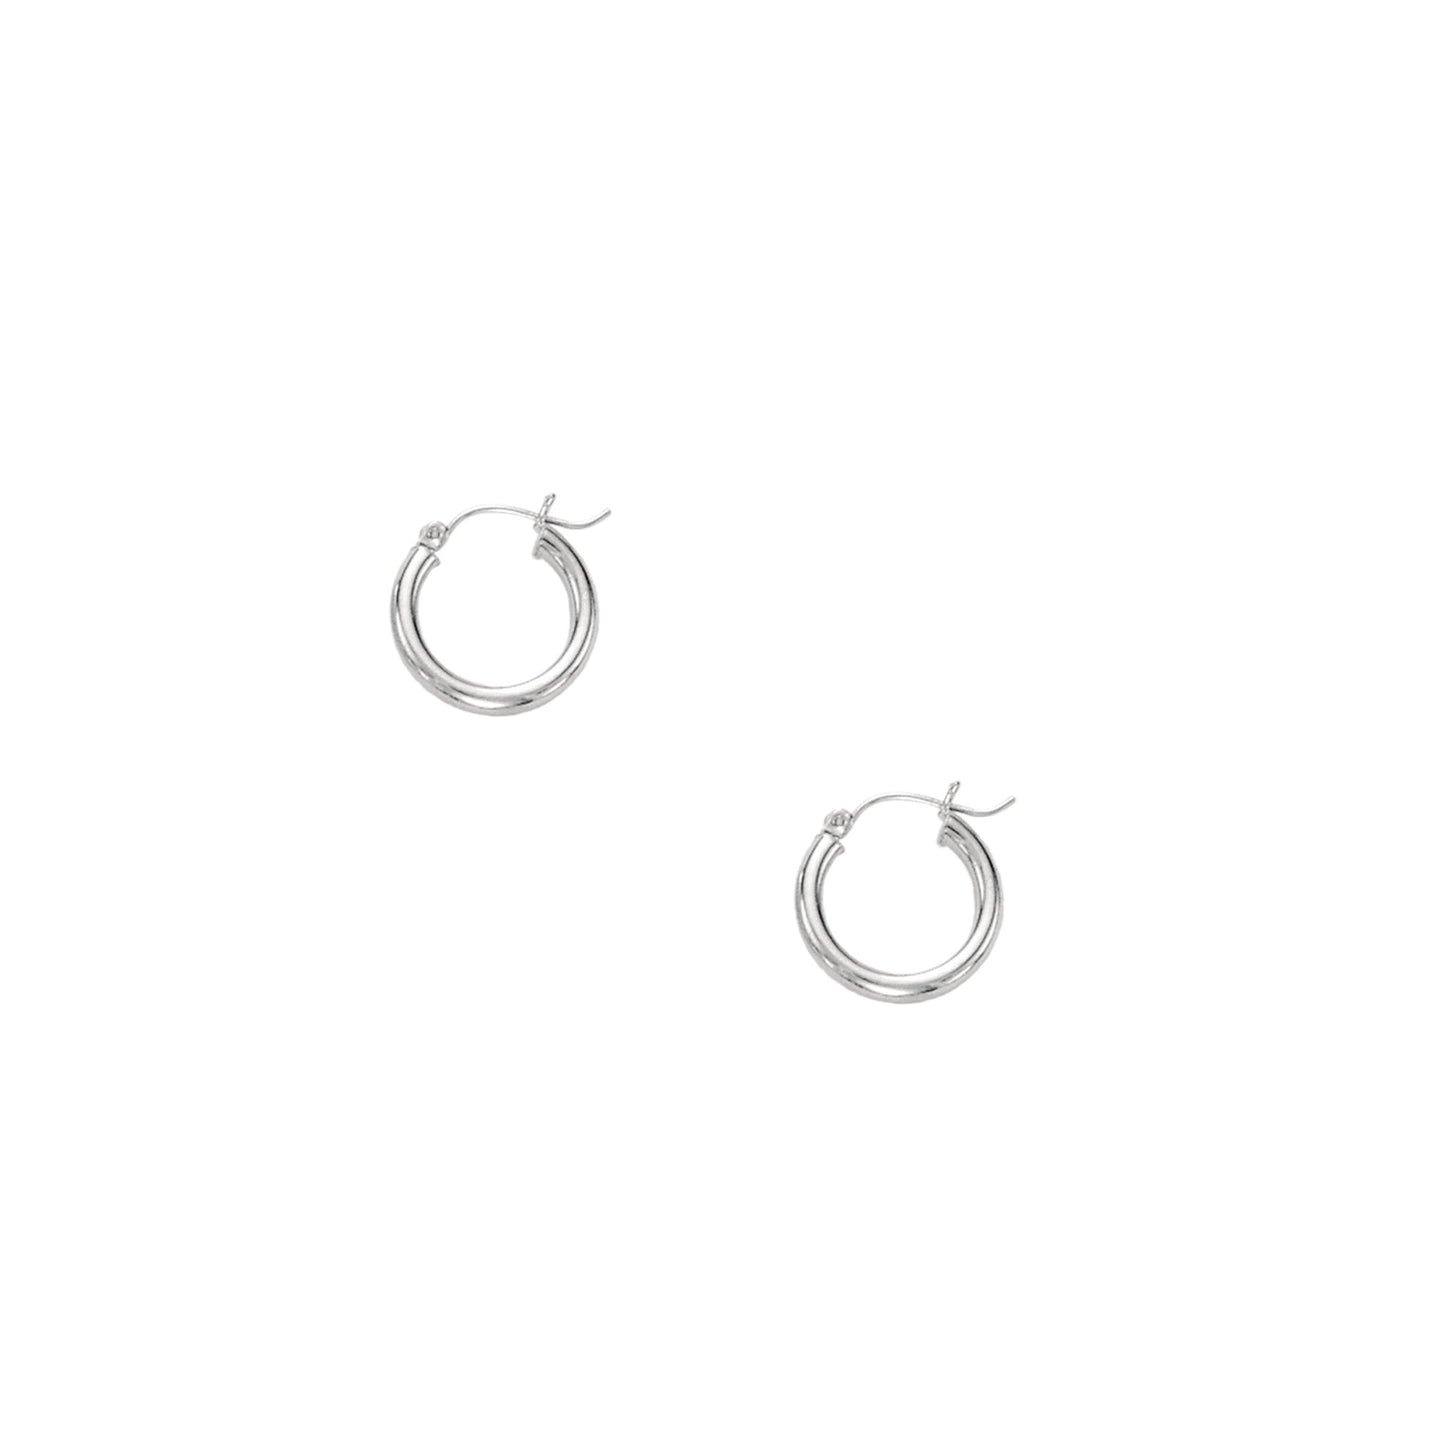 Polished 14K Gold Round Hoop Earring with Hinged Clasp